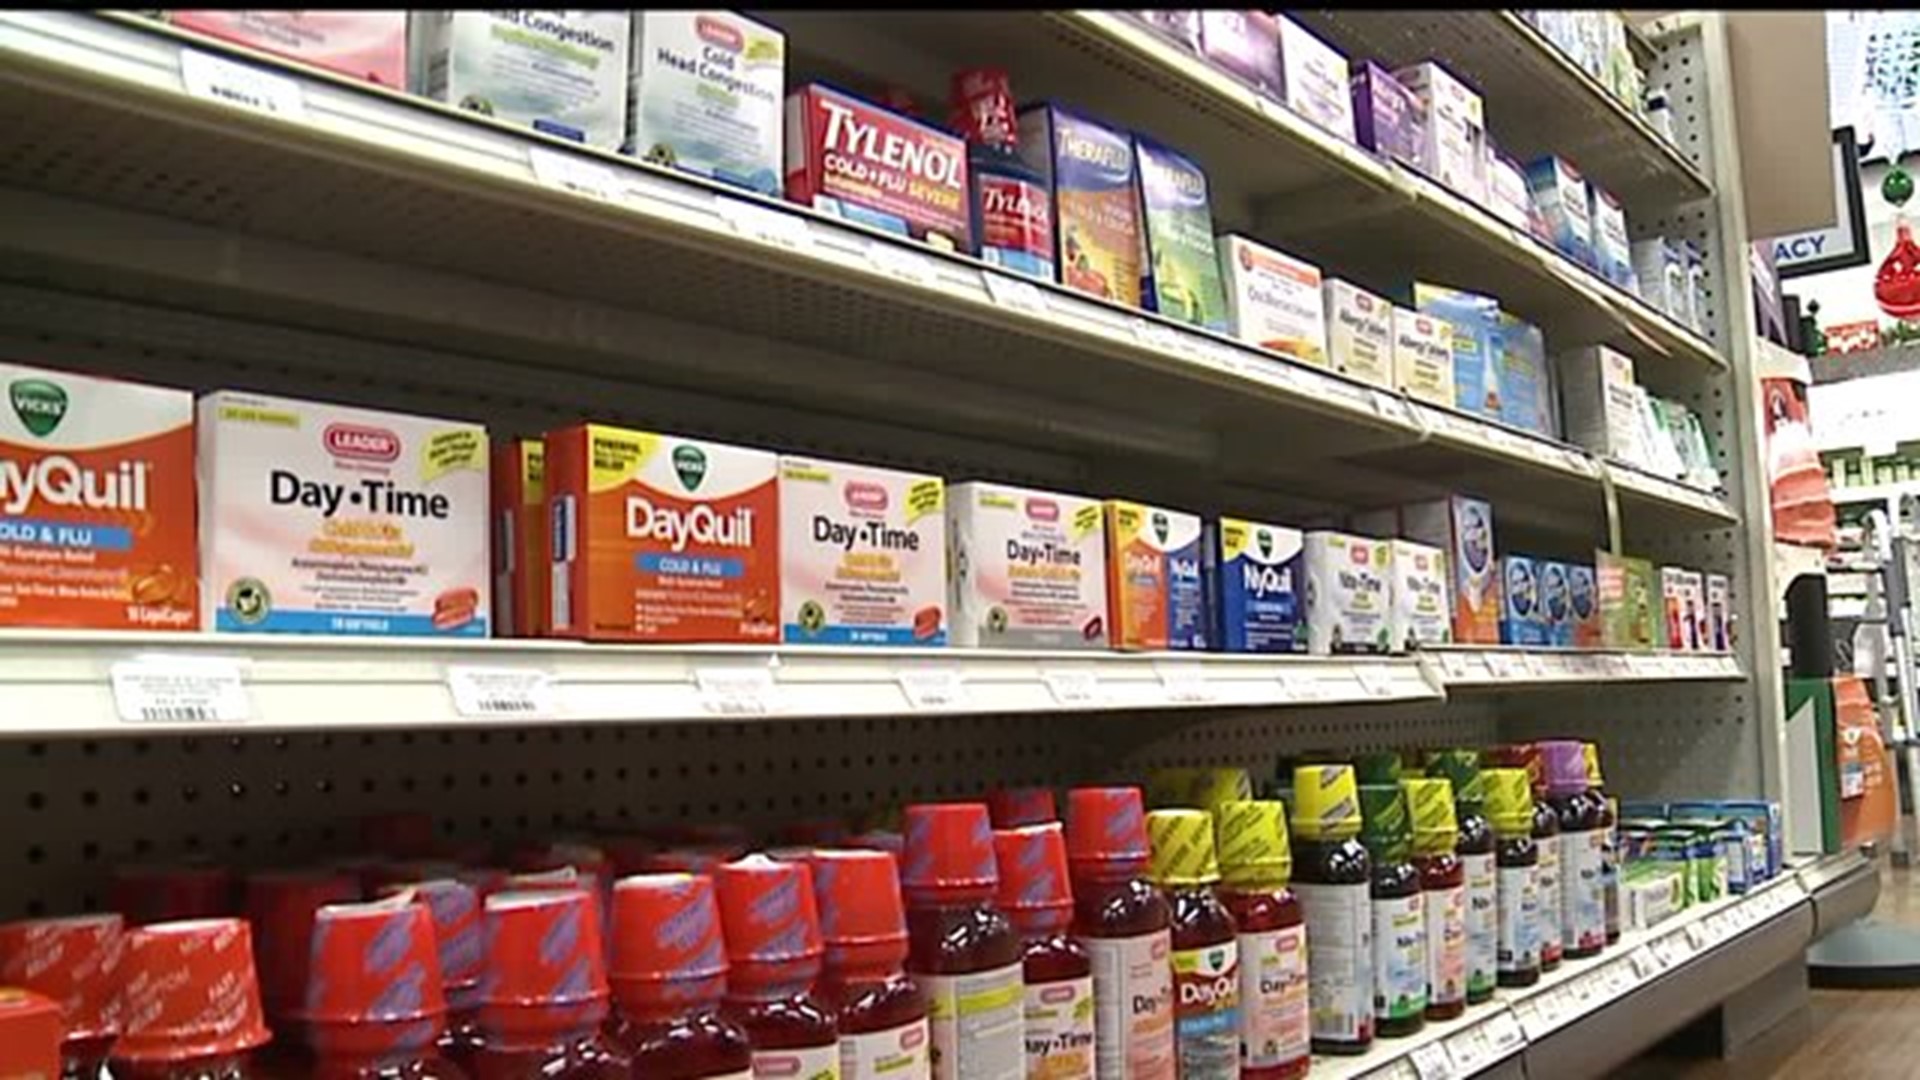 Over the counter drugs: worth it or a waste of money?